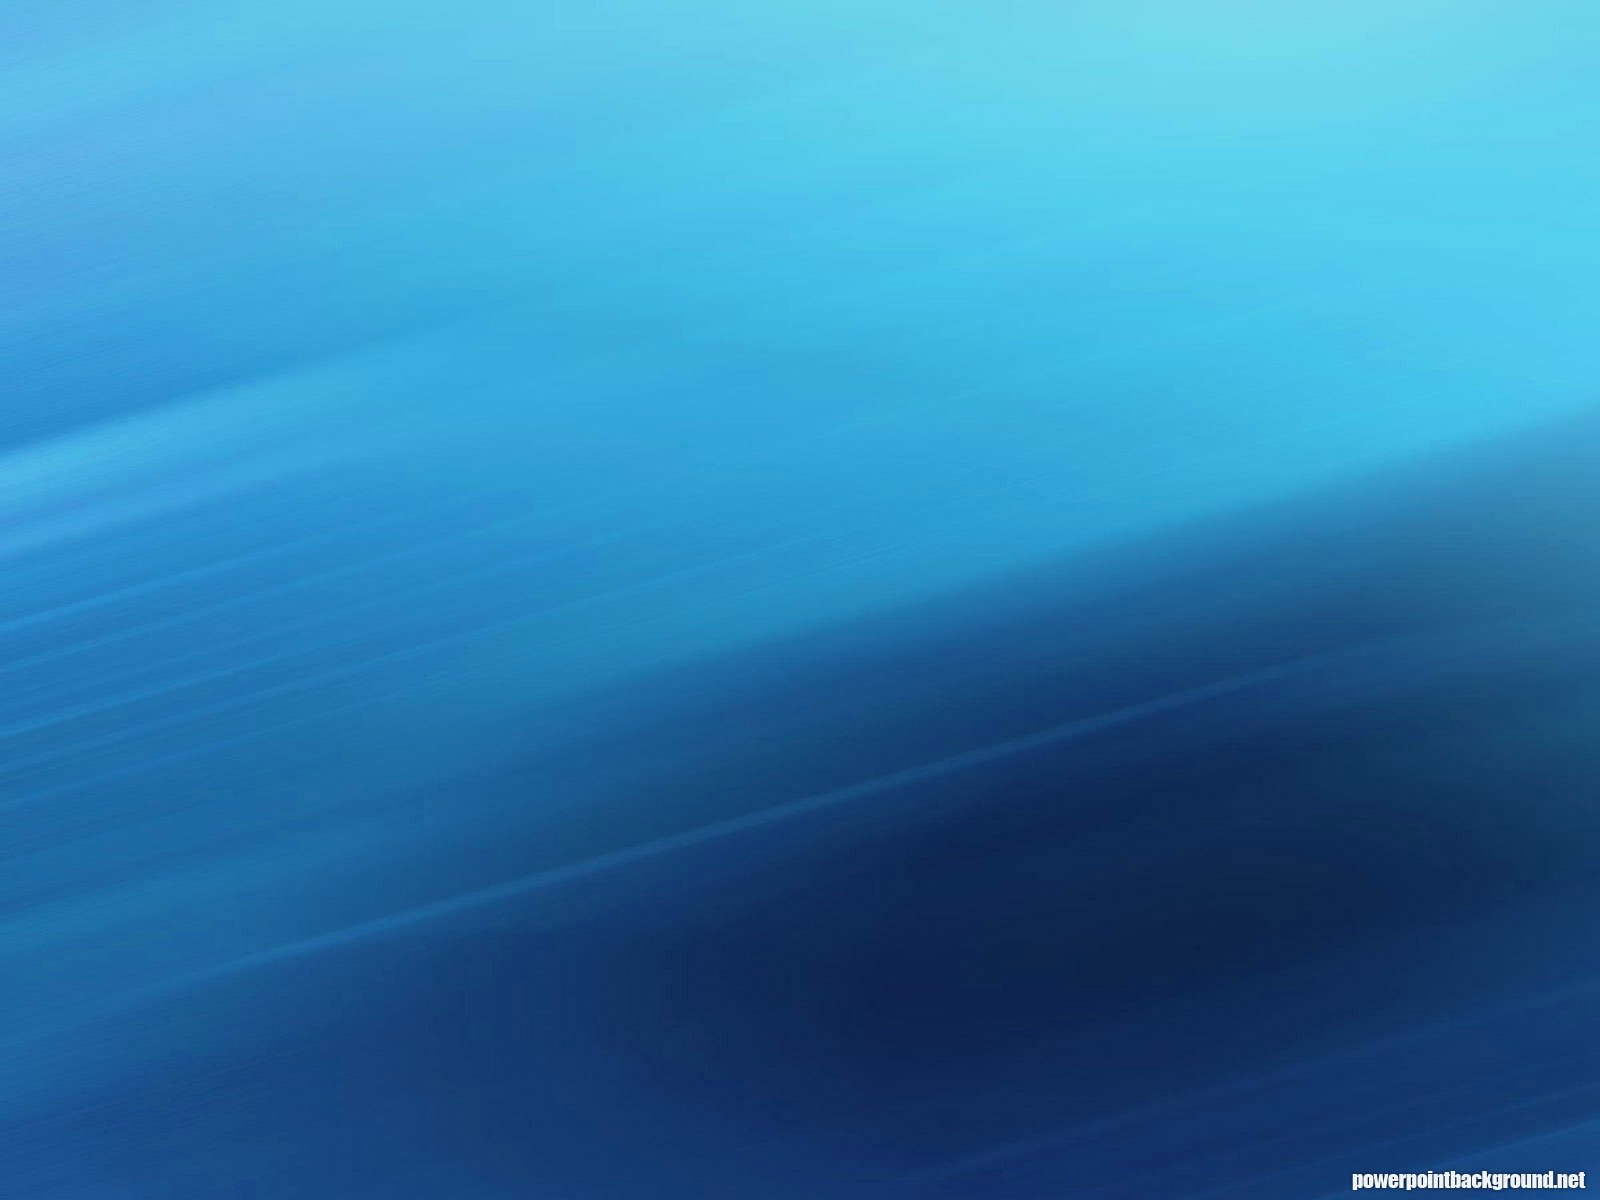 Powerpoint Background Image Free Download Fresh Blue – Powerpoint Background